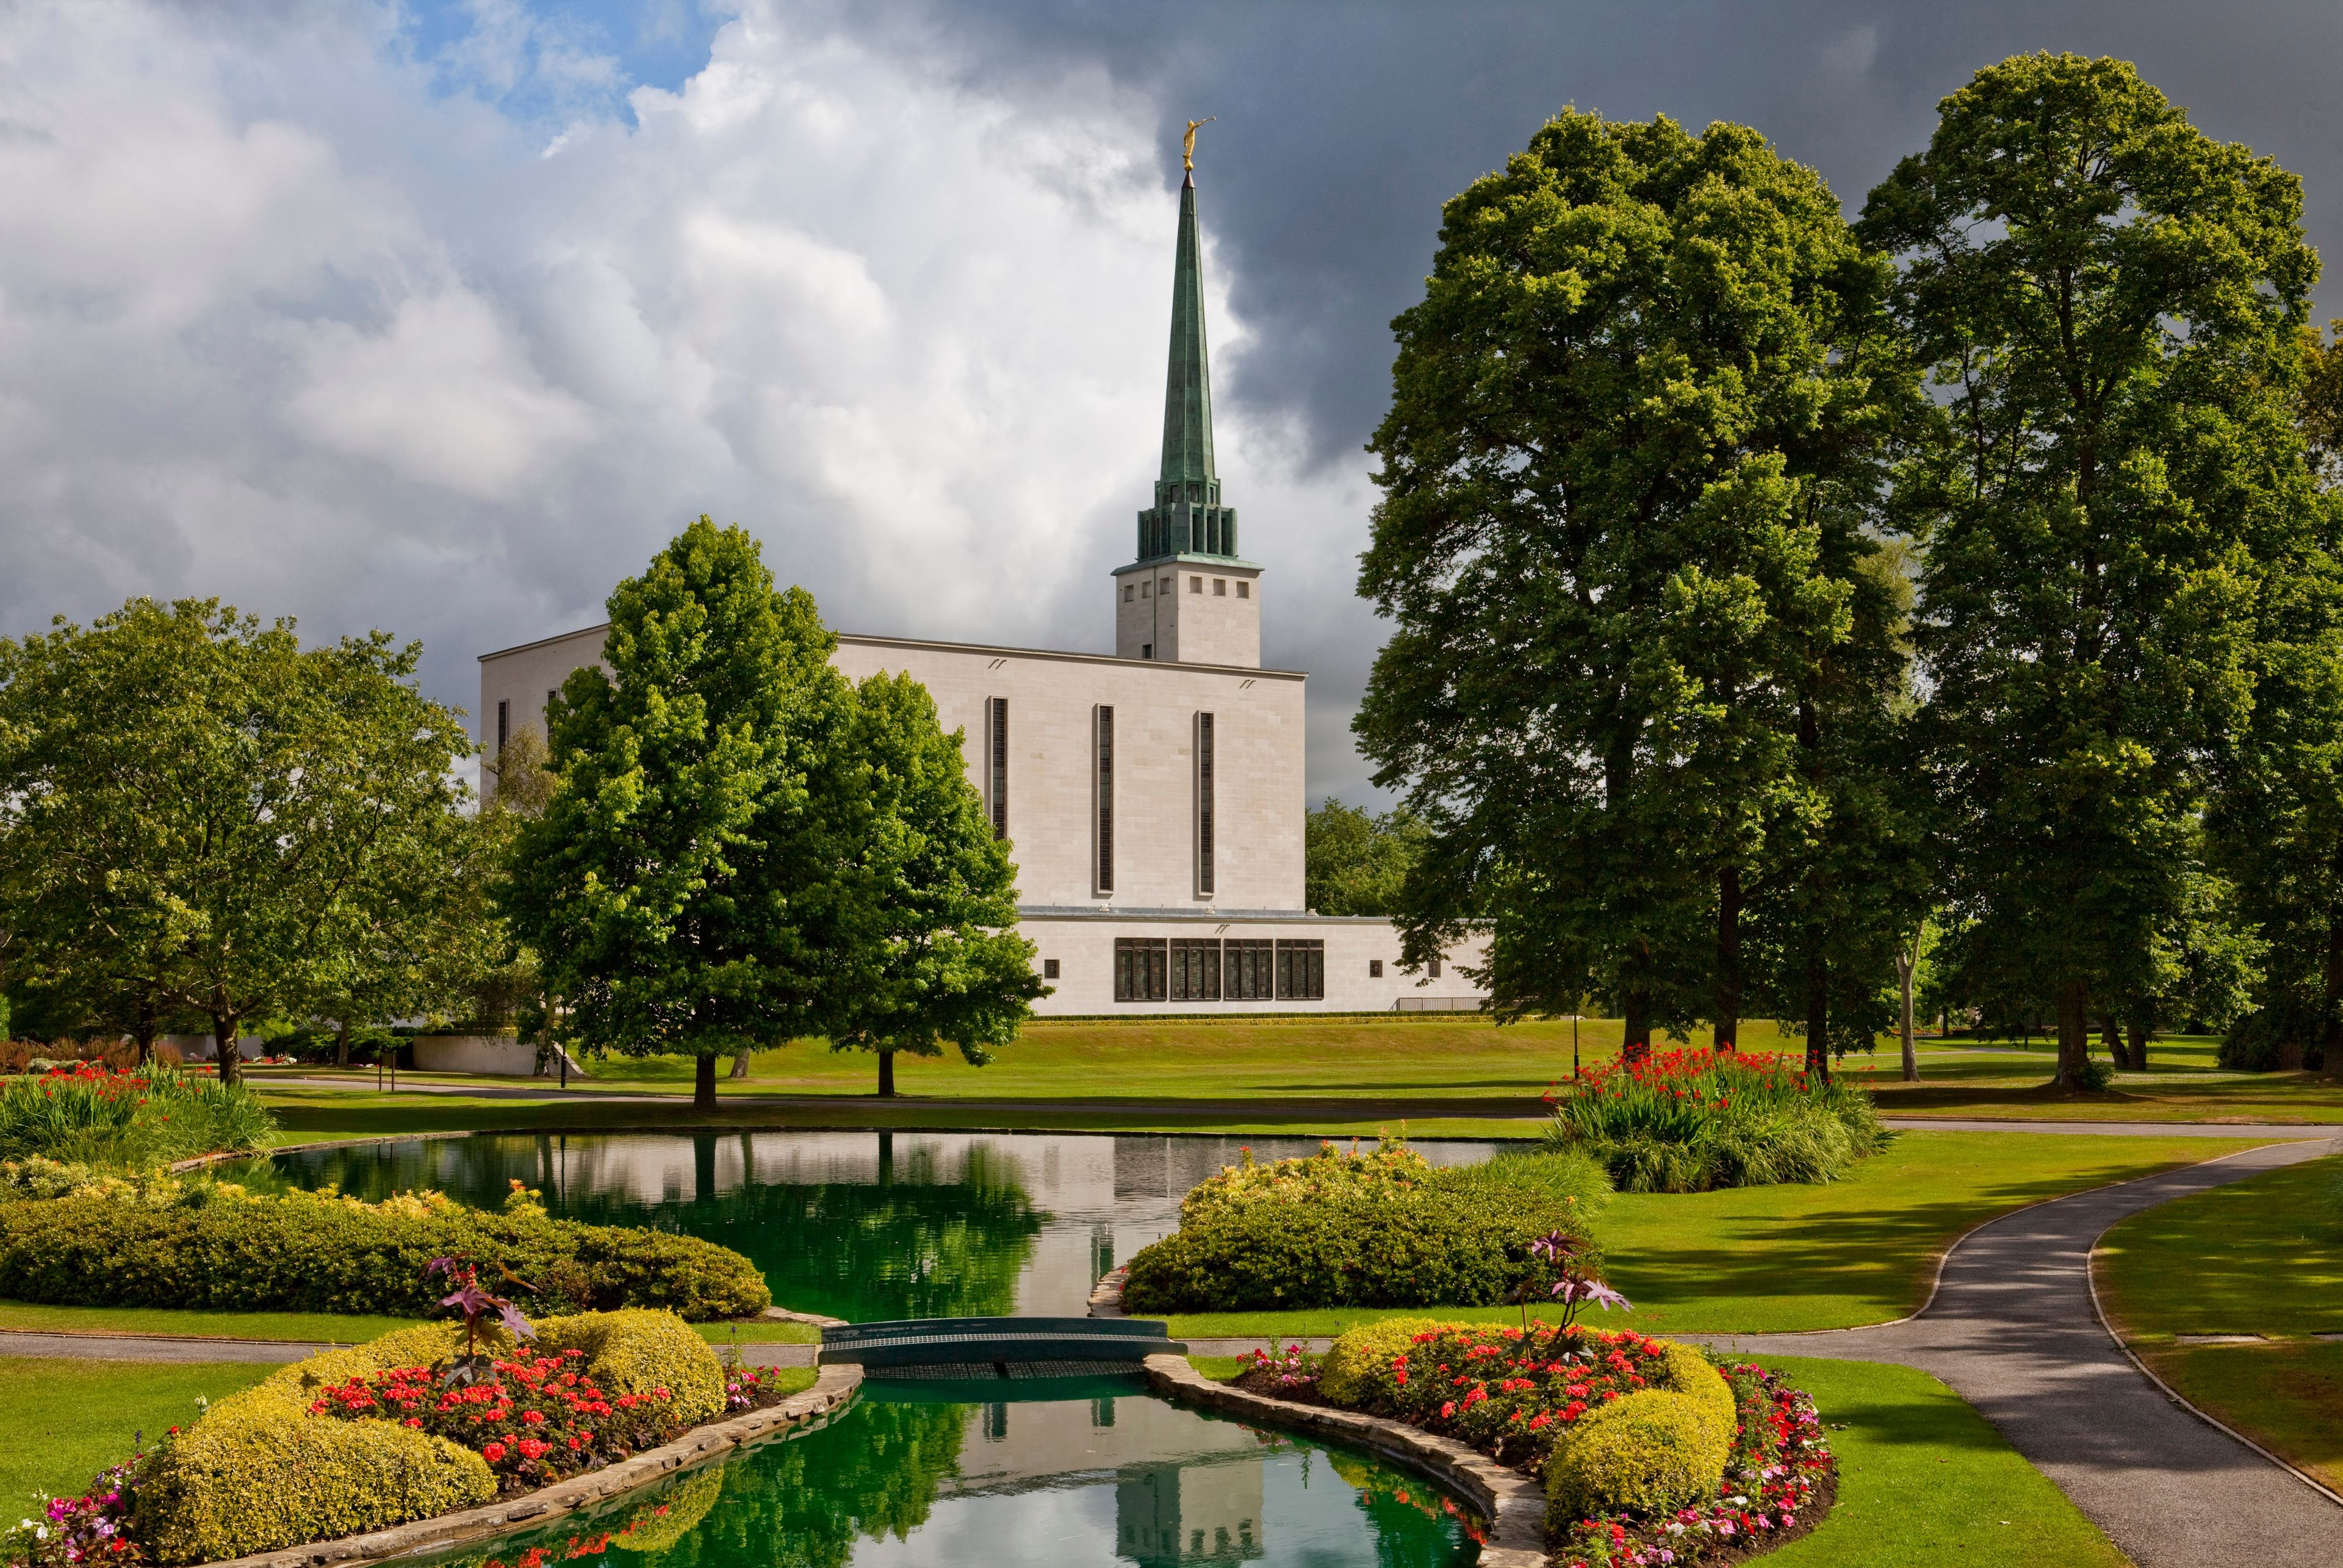 The London England Temple and grounds.